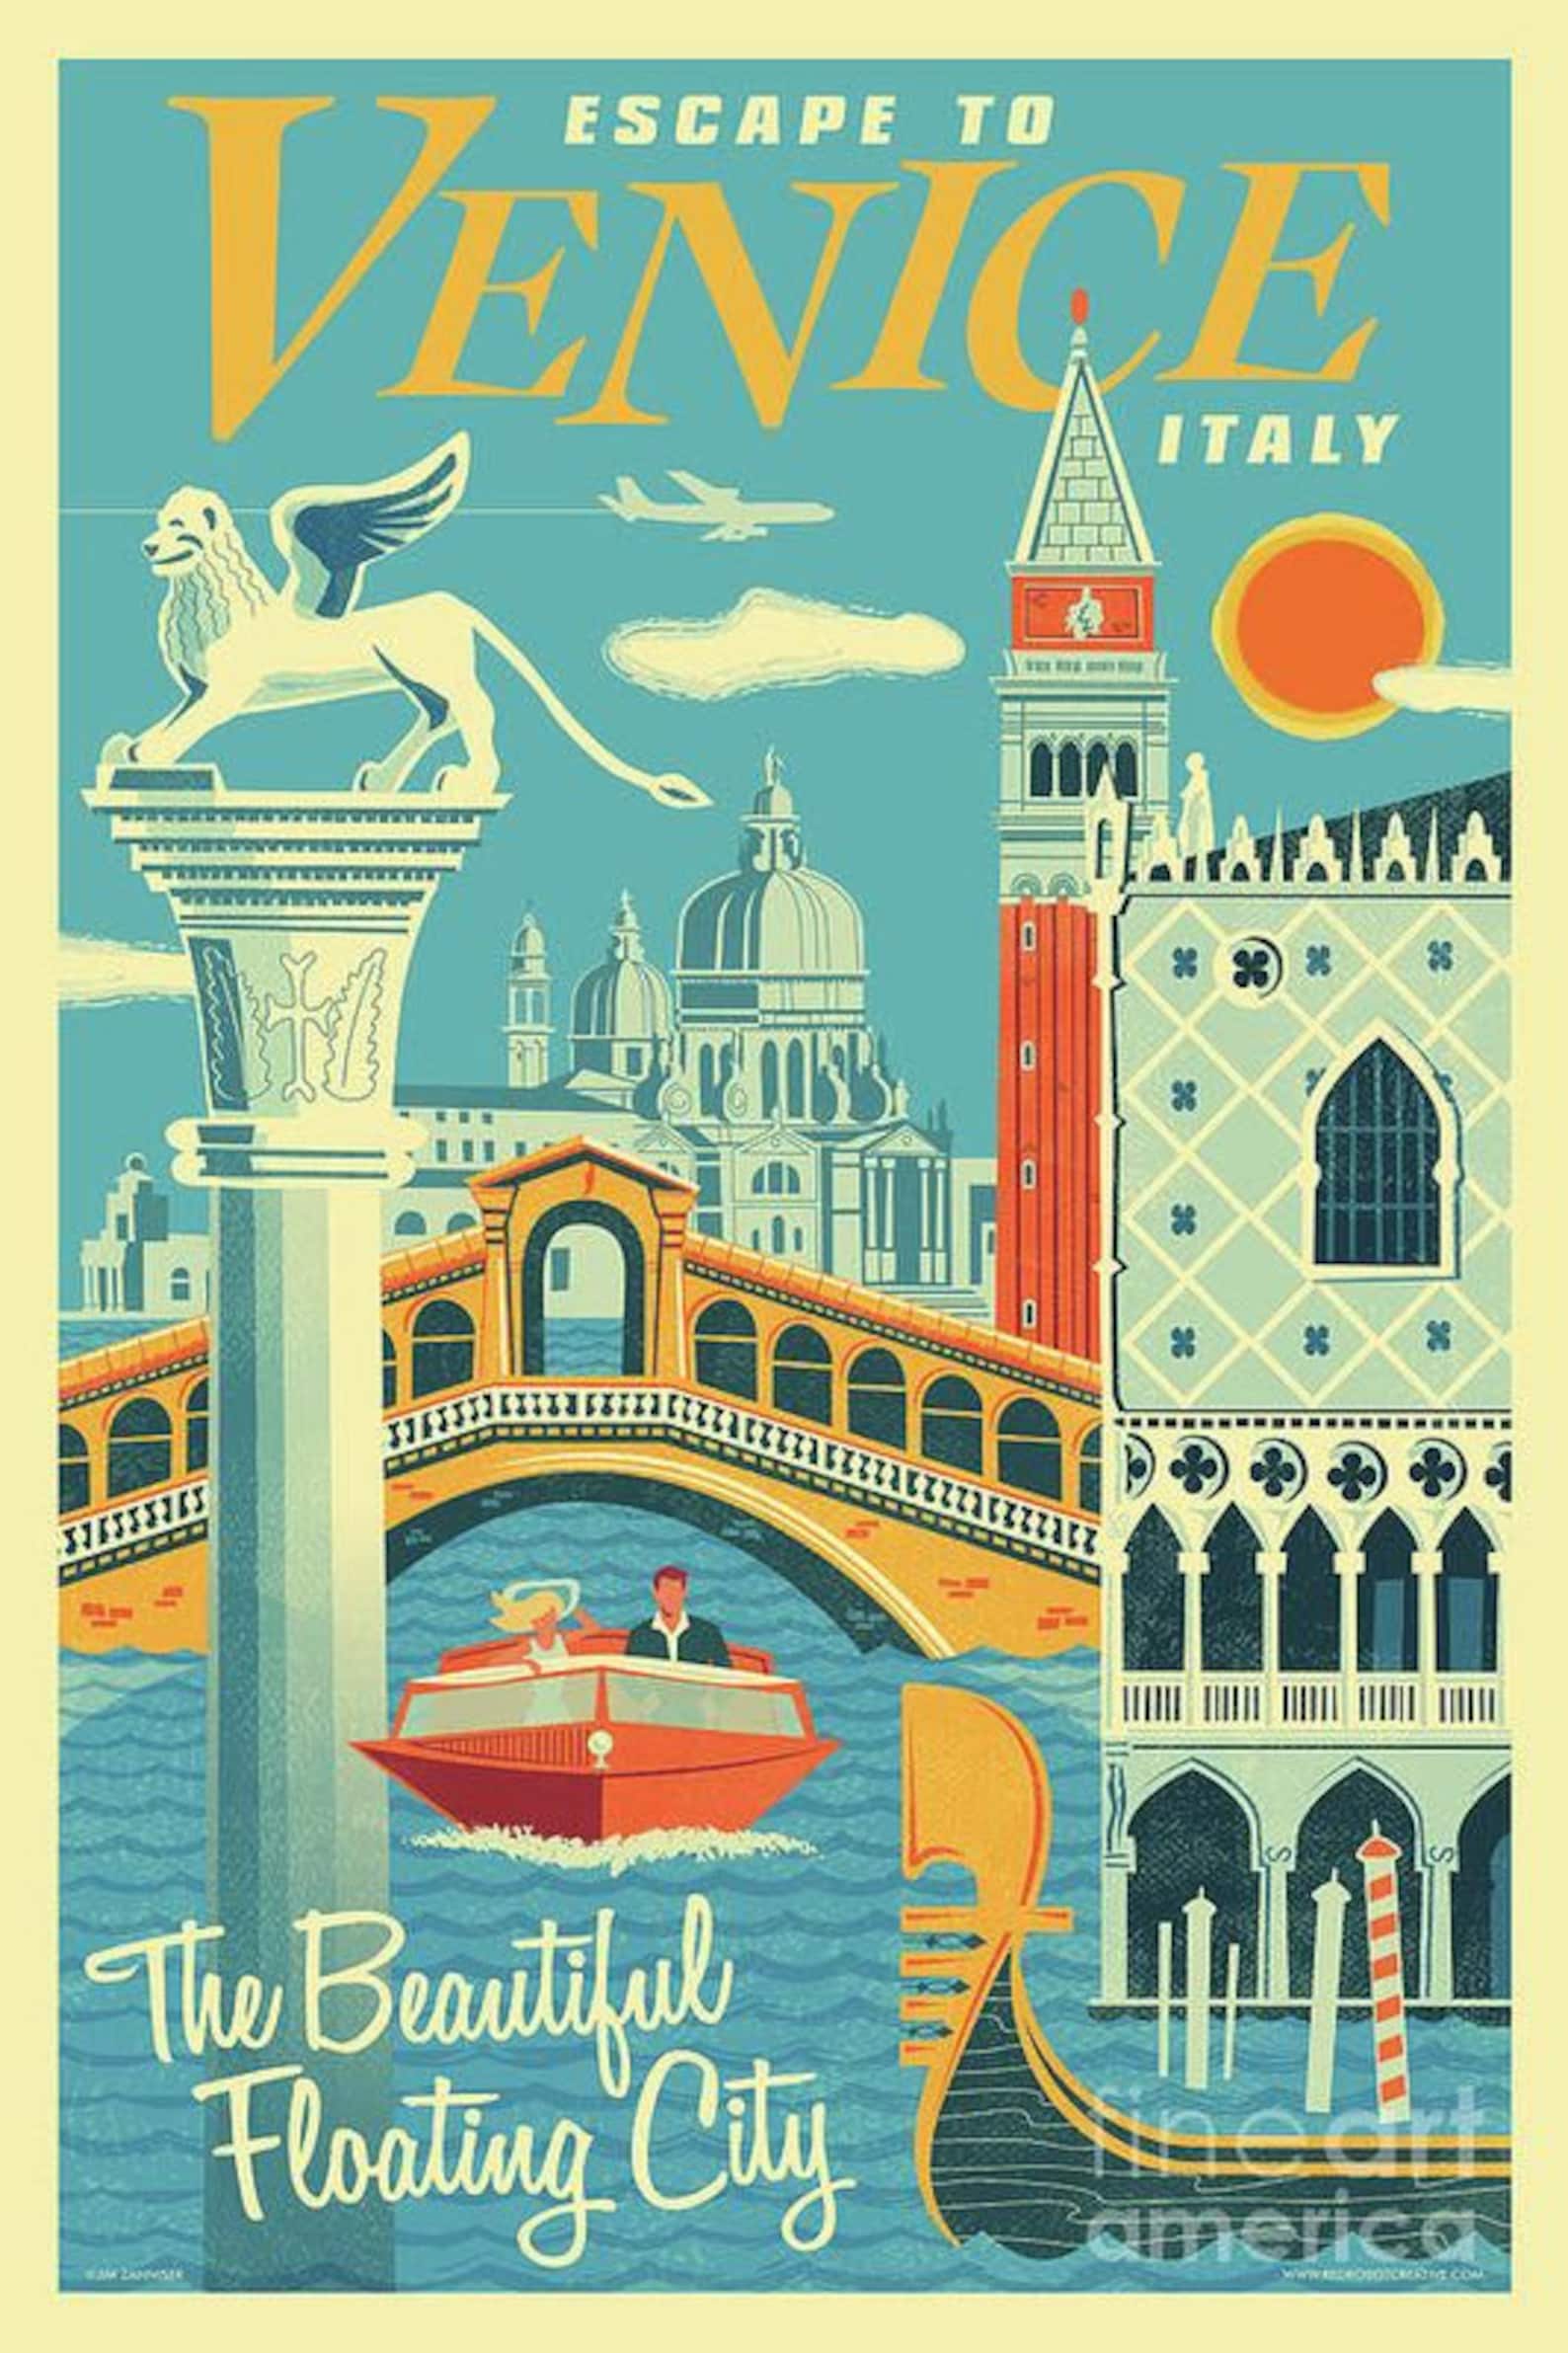 etsy.com travel posters